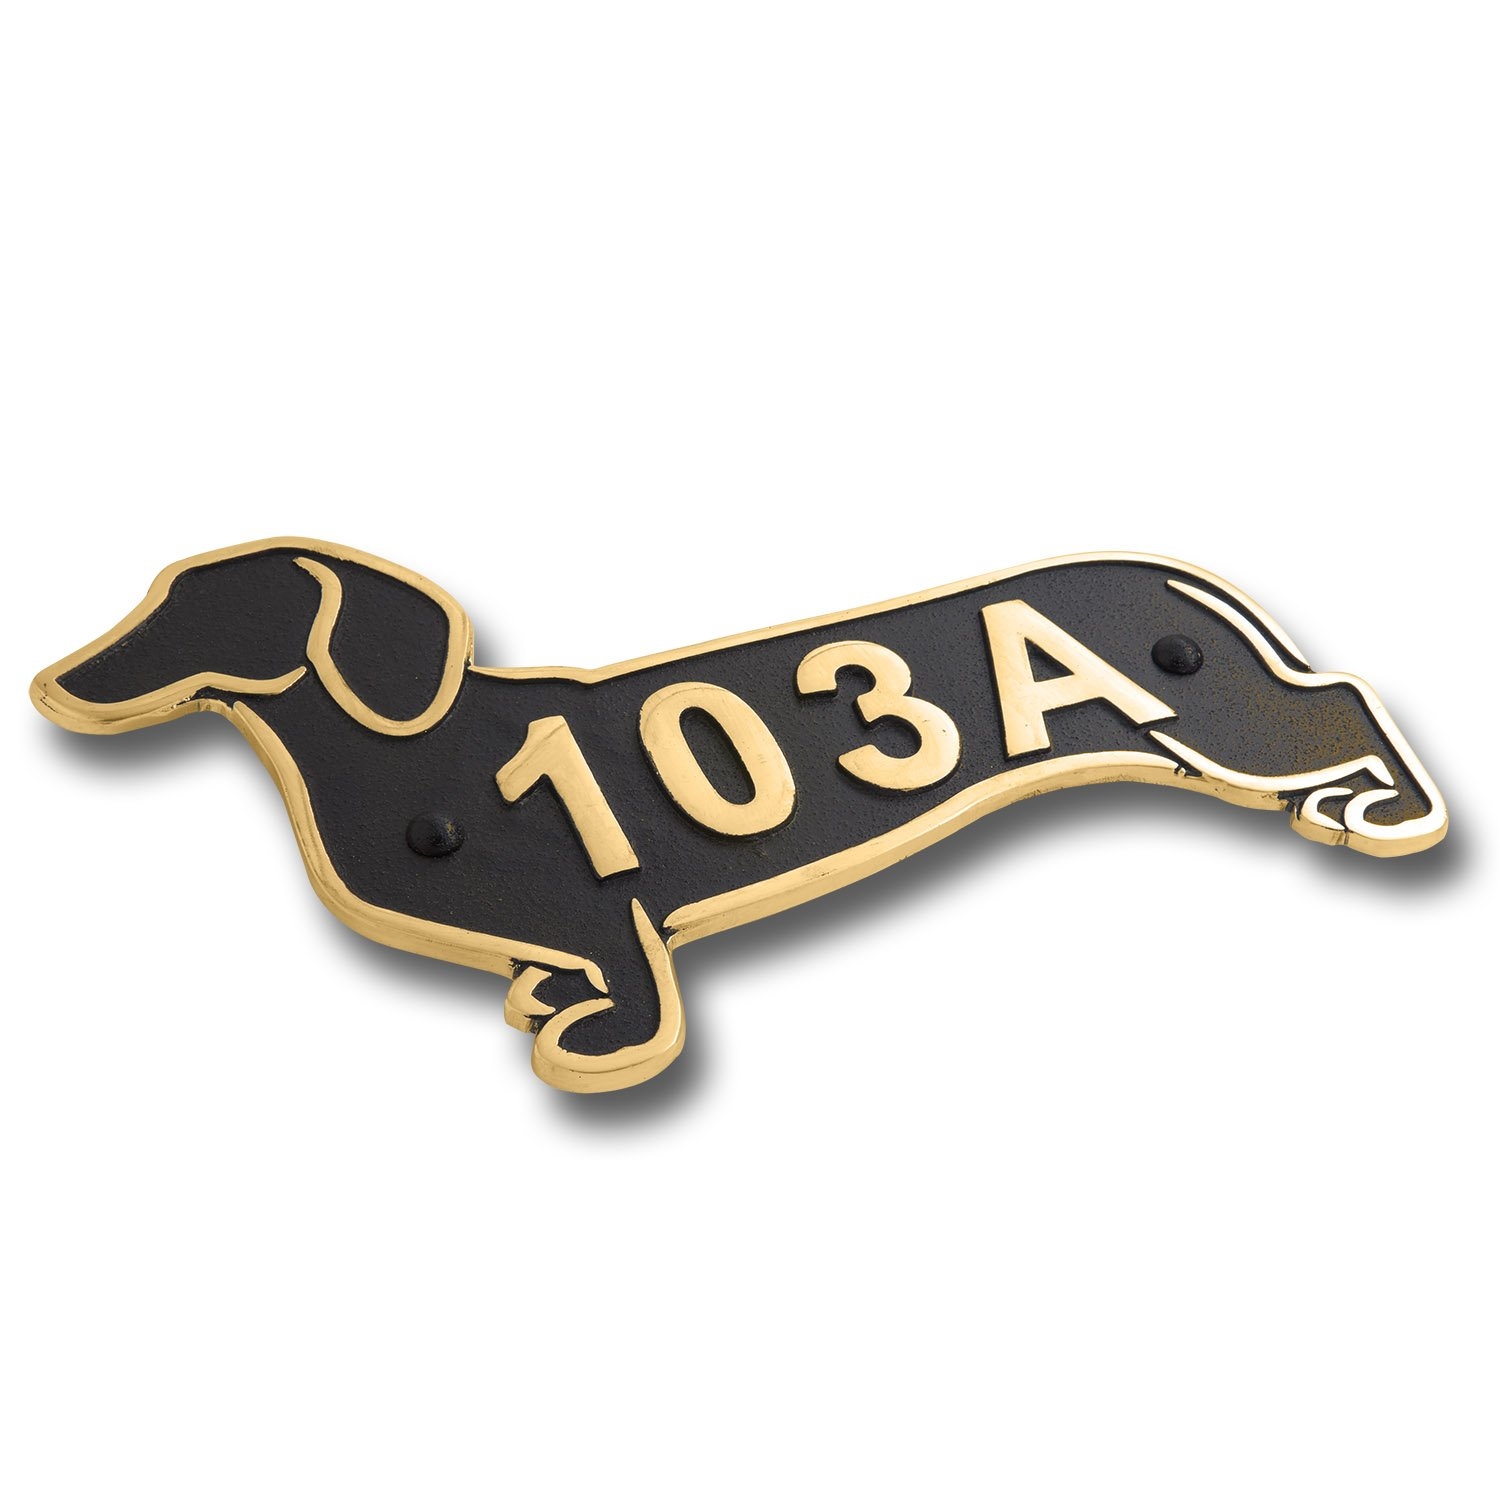 Dachshund Metal House Number Address Plaque. Sausage Dog Gift Idea For A Dachshund Owner. Yard Or Garden Dachshund Décor Makes A Great Gift For Him Or Her – Brass & Burgundy